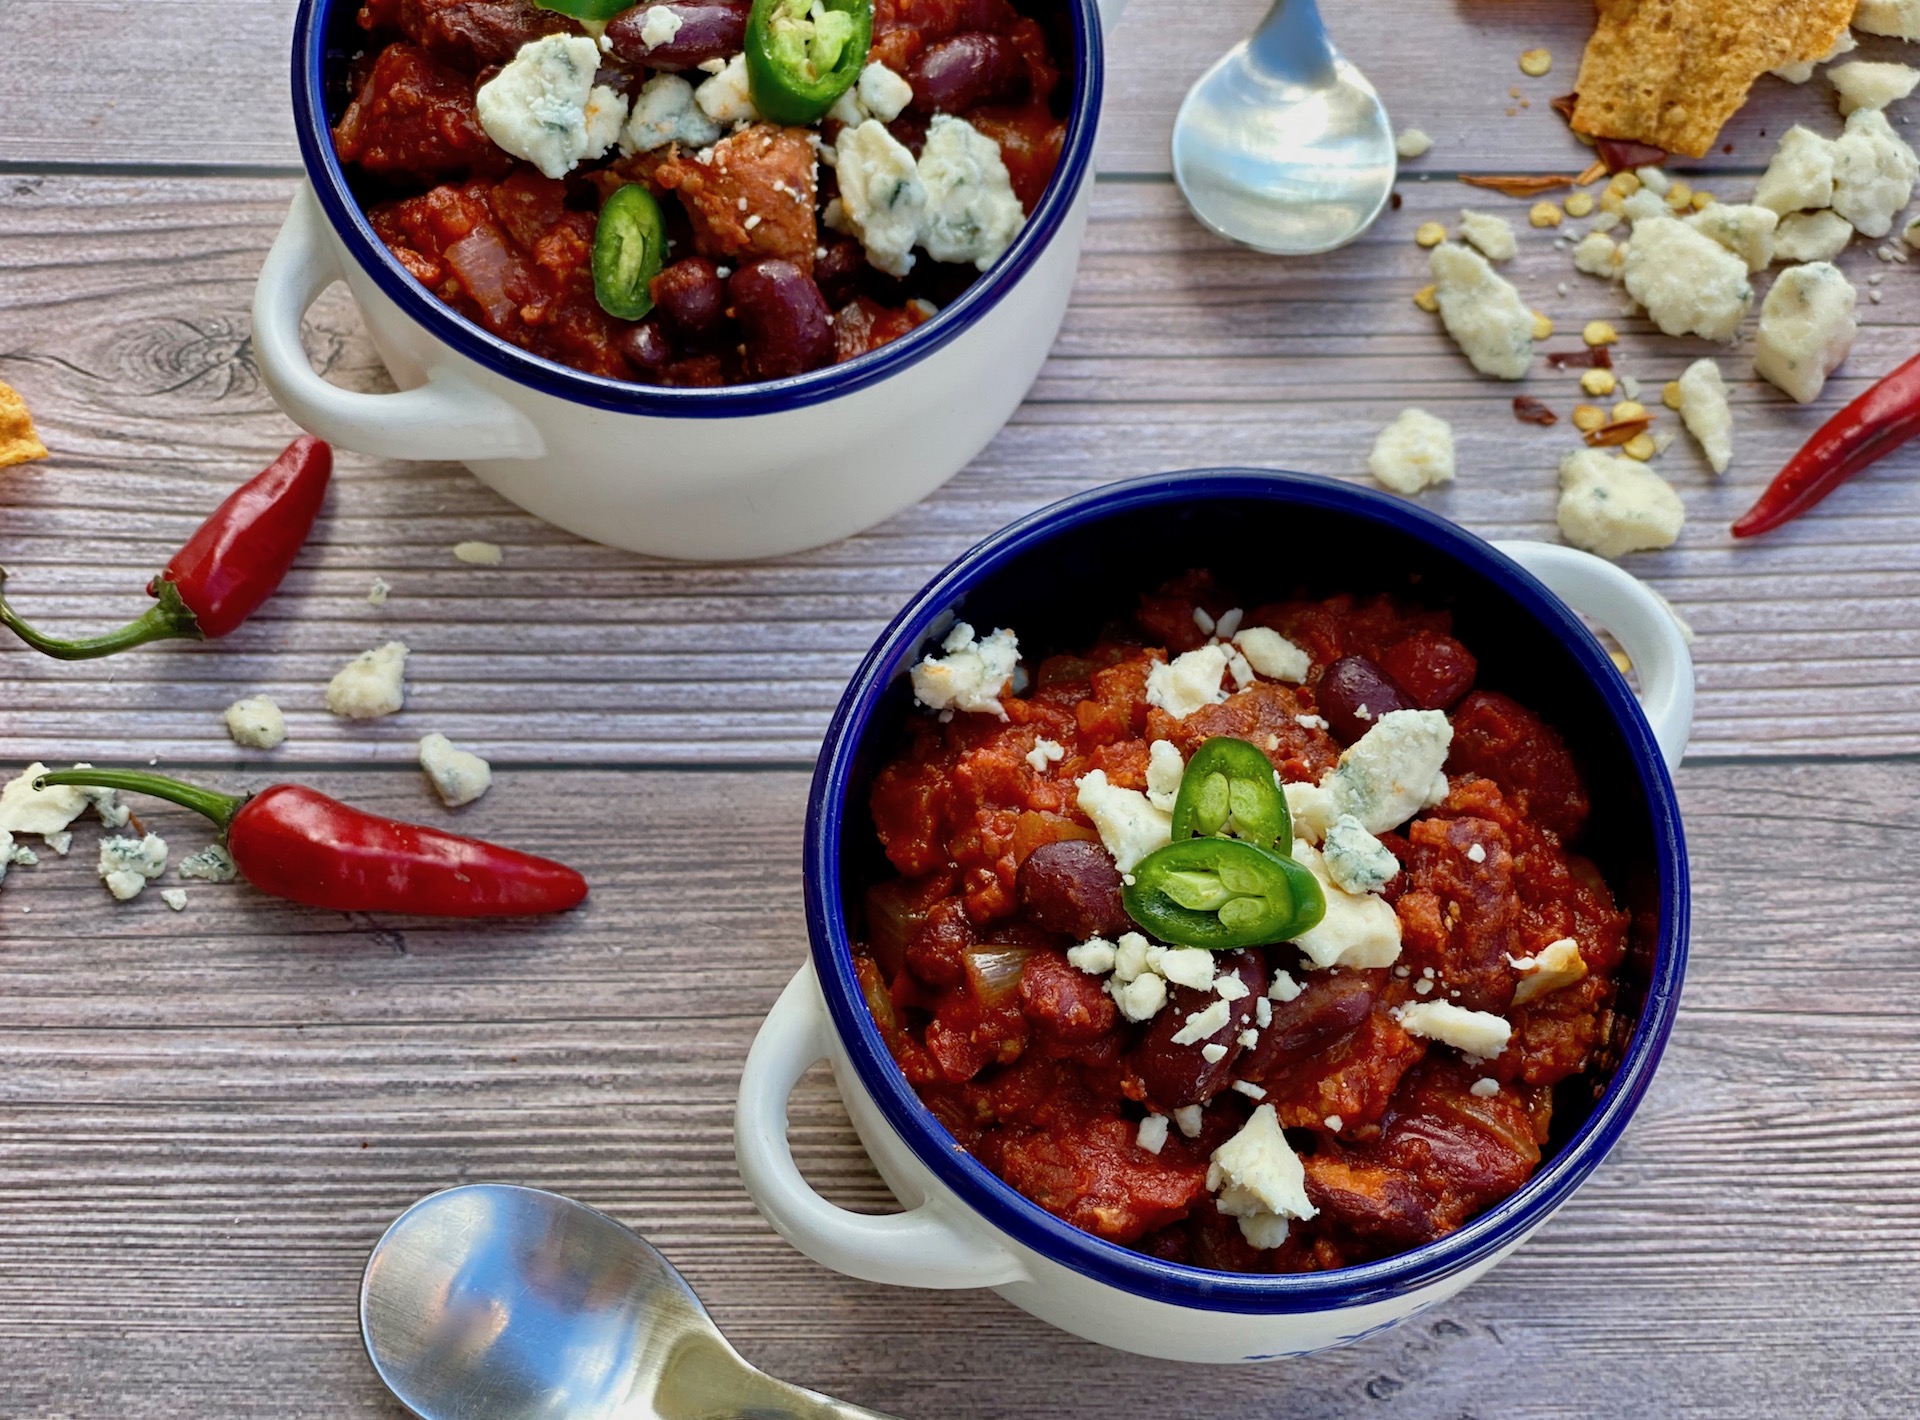 Quick Smoky-Flavored Chili with Blue Cheese